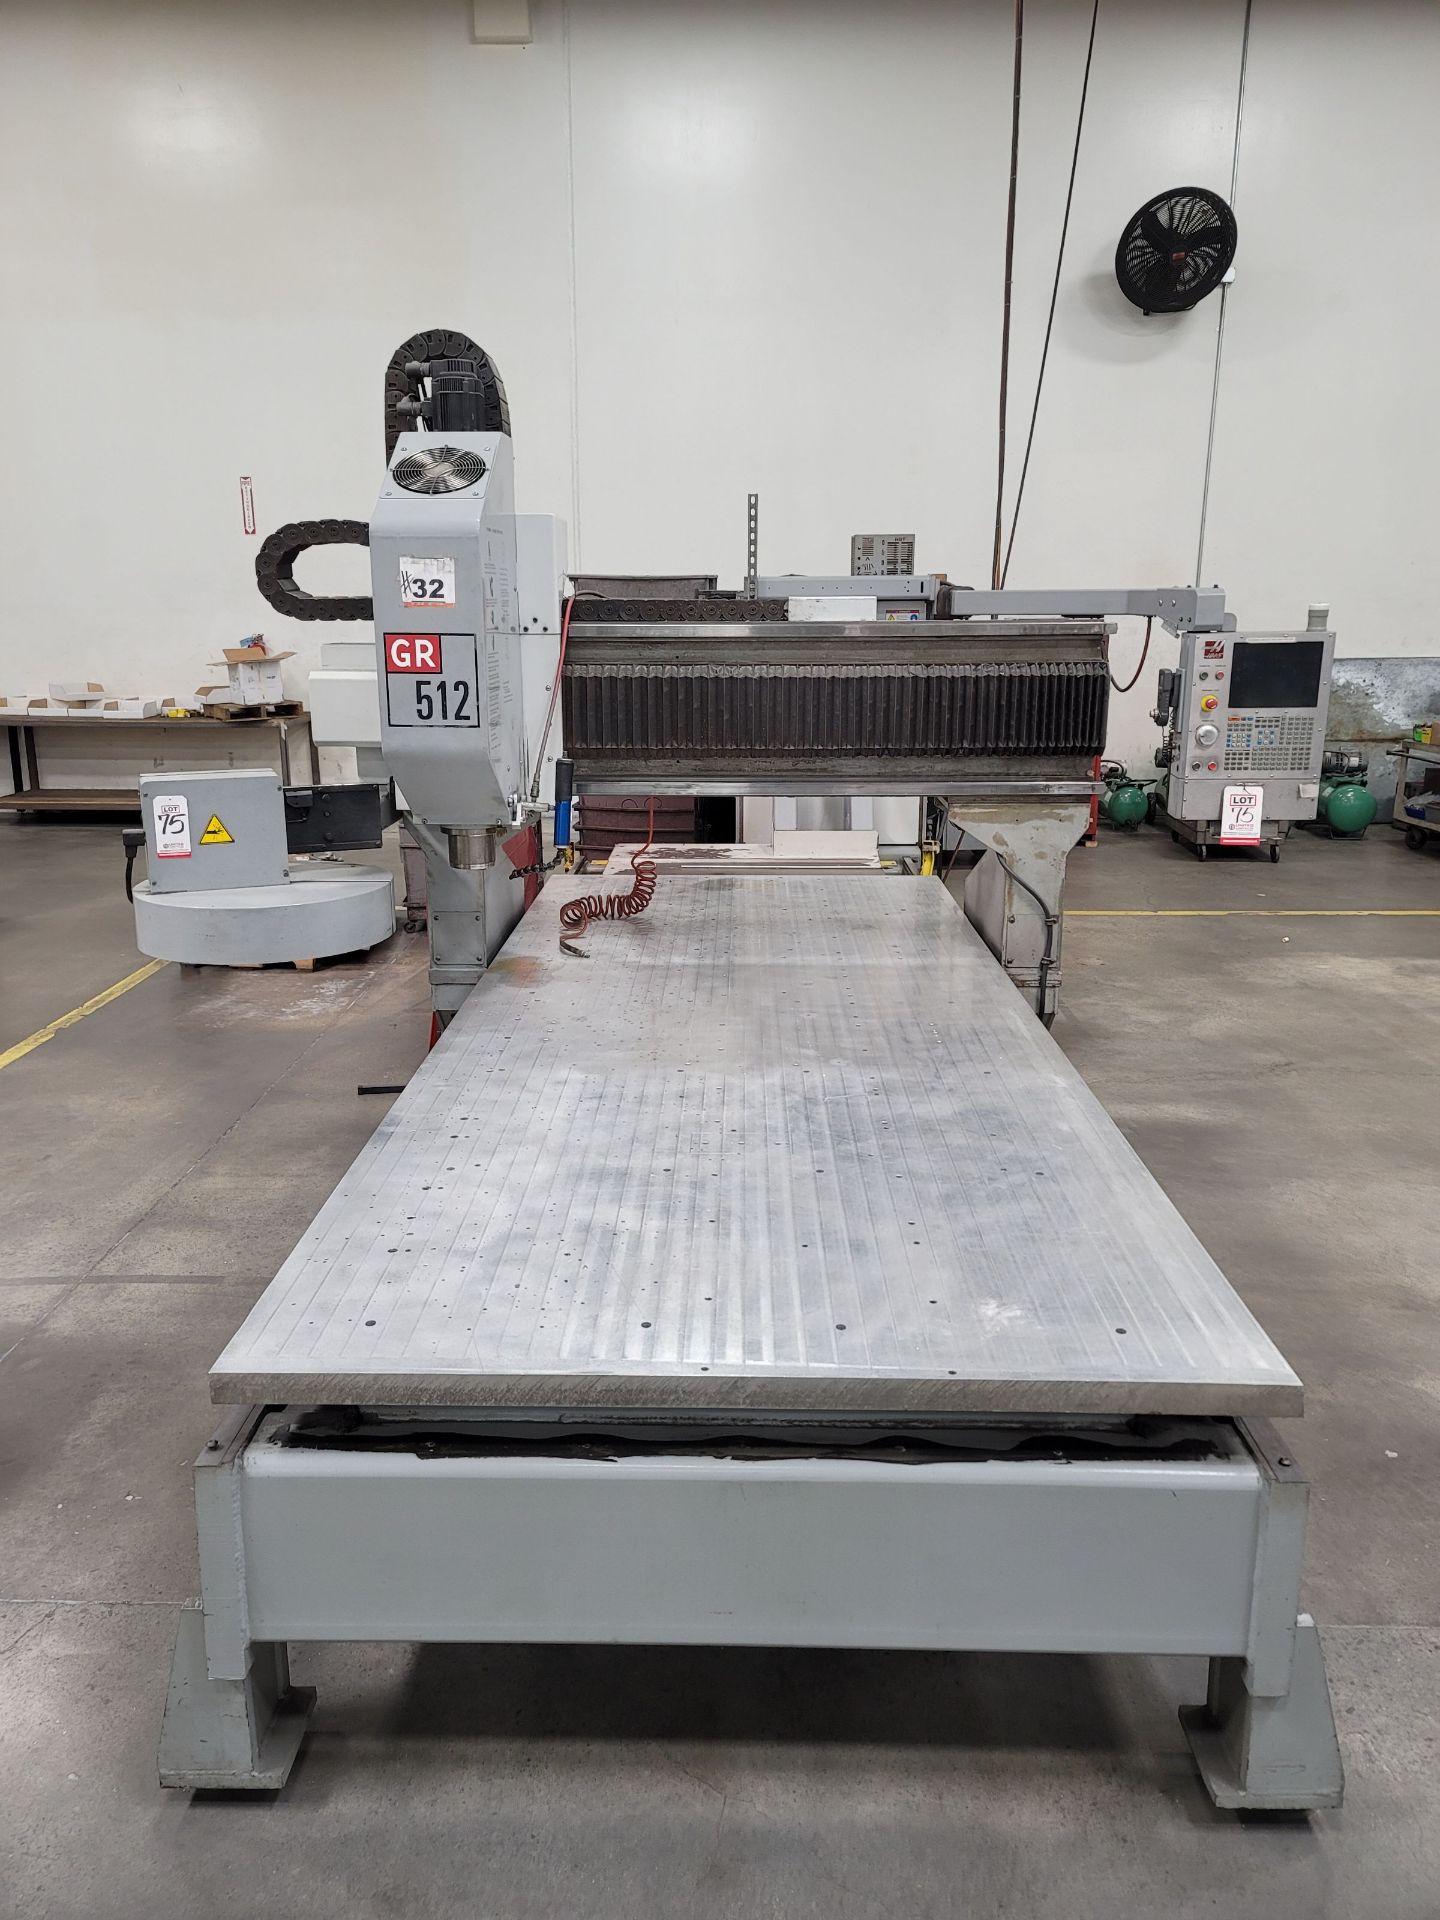 2009 HAAS GR-512 GANTRY ROUTER, 5' X 12' TABLE; TRAVELING GANTRY STYLE, 20.5" UNDER THE BRIDGE, - Image 2 of 12